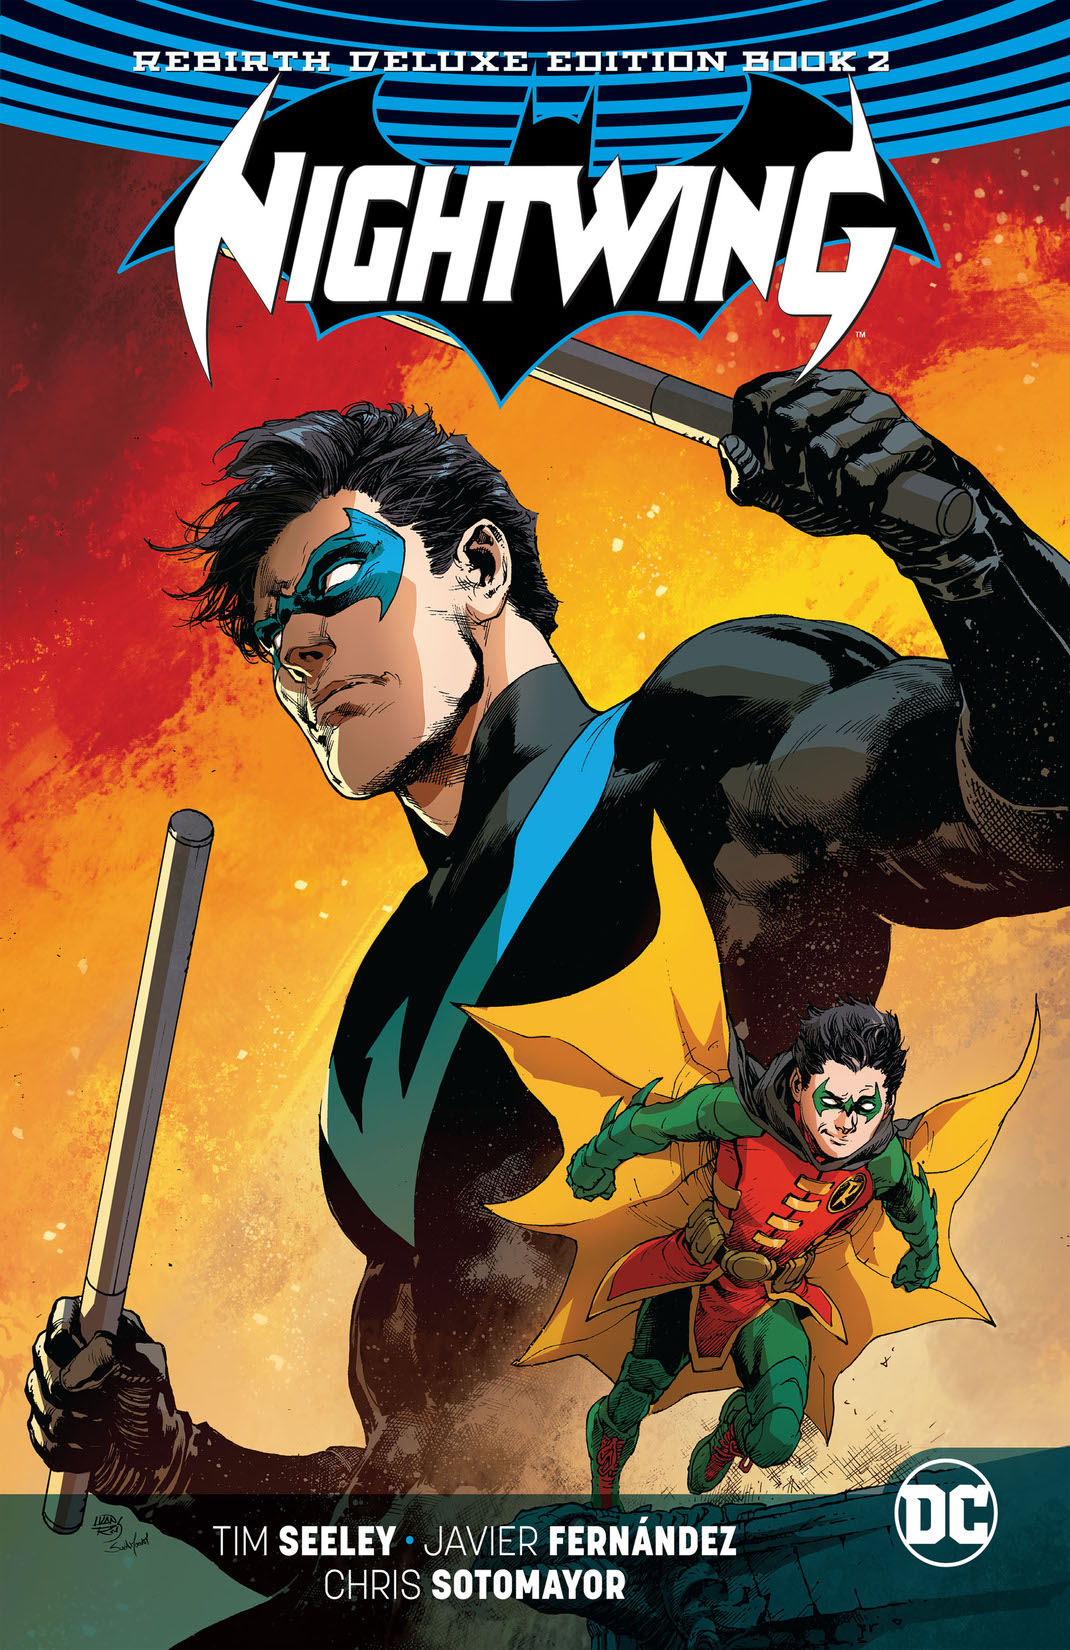 Nightwing: The Rebirth Deluxe Edition Book 2 preview images